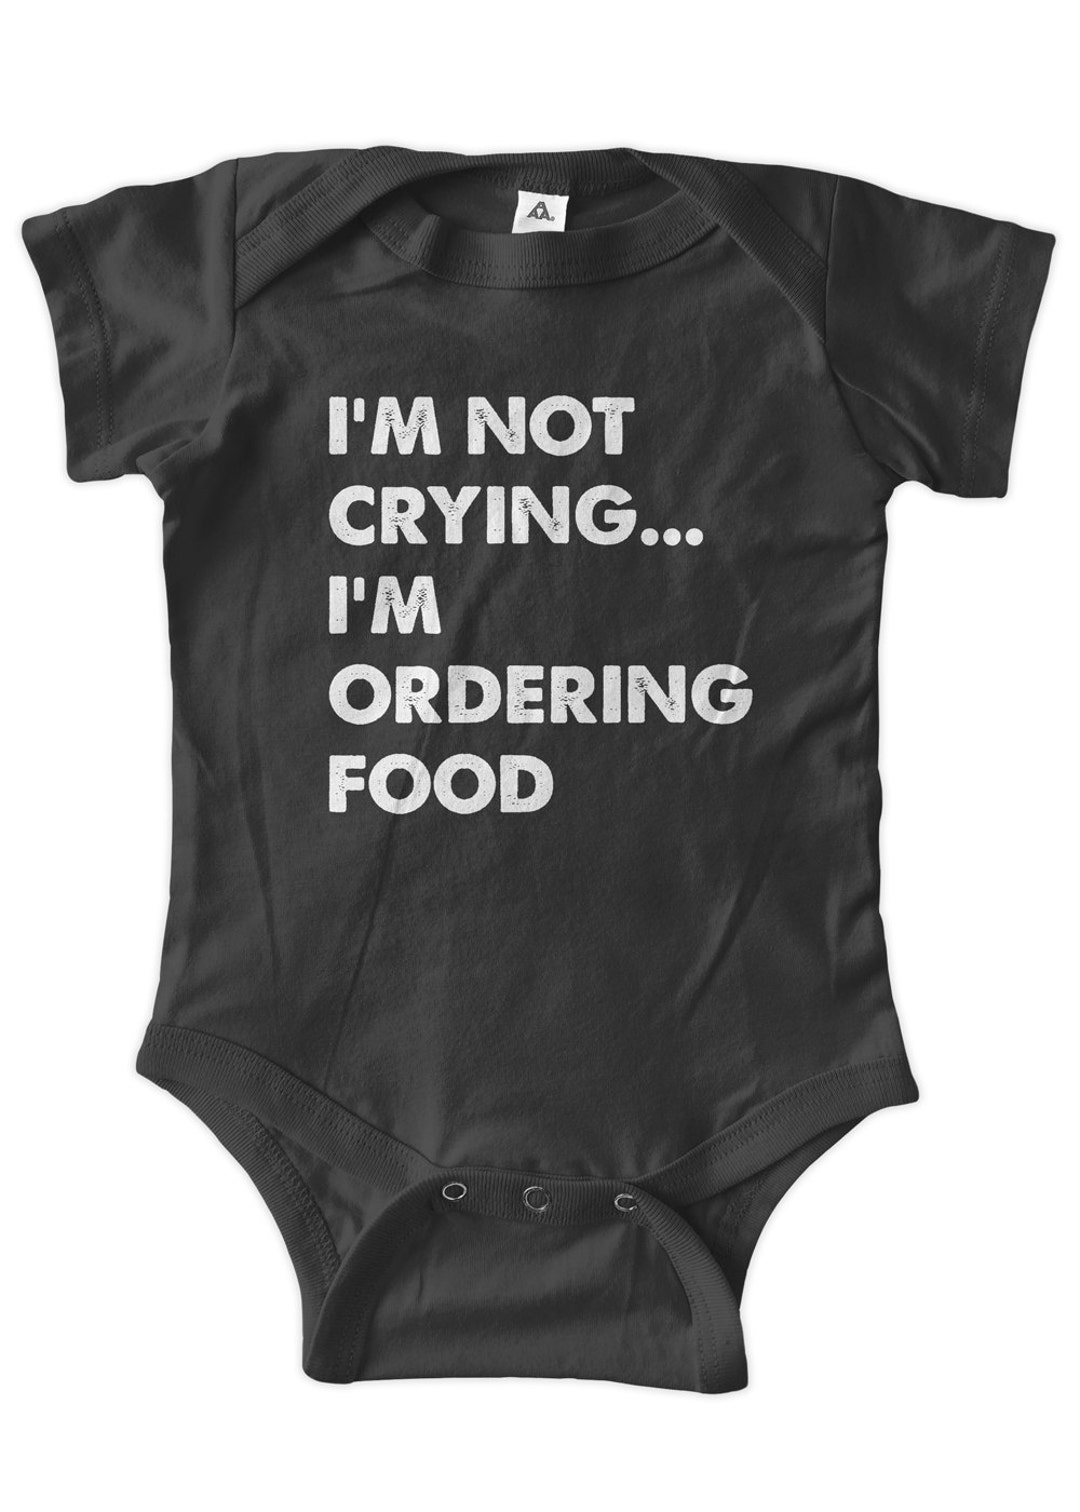 PIMP Poop in My Pants Funny Baby One Piece Funny Gift Body Suit Gifts  Graphic Infant Clothing Baby Shower Gift Short Sleeve Bodysuit 